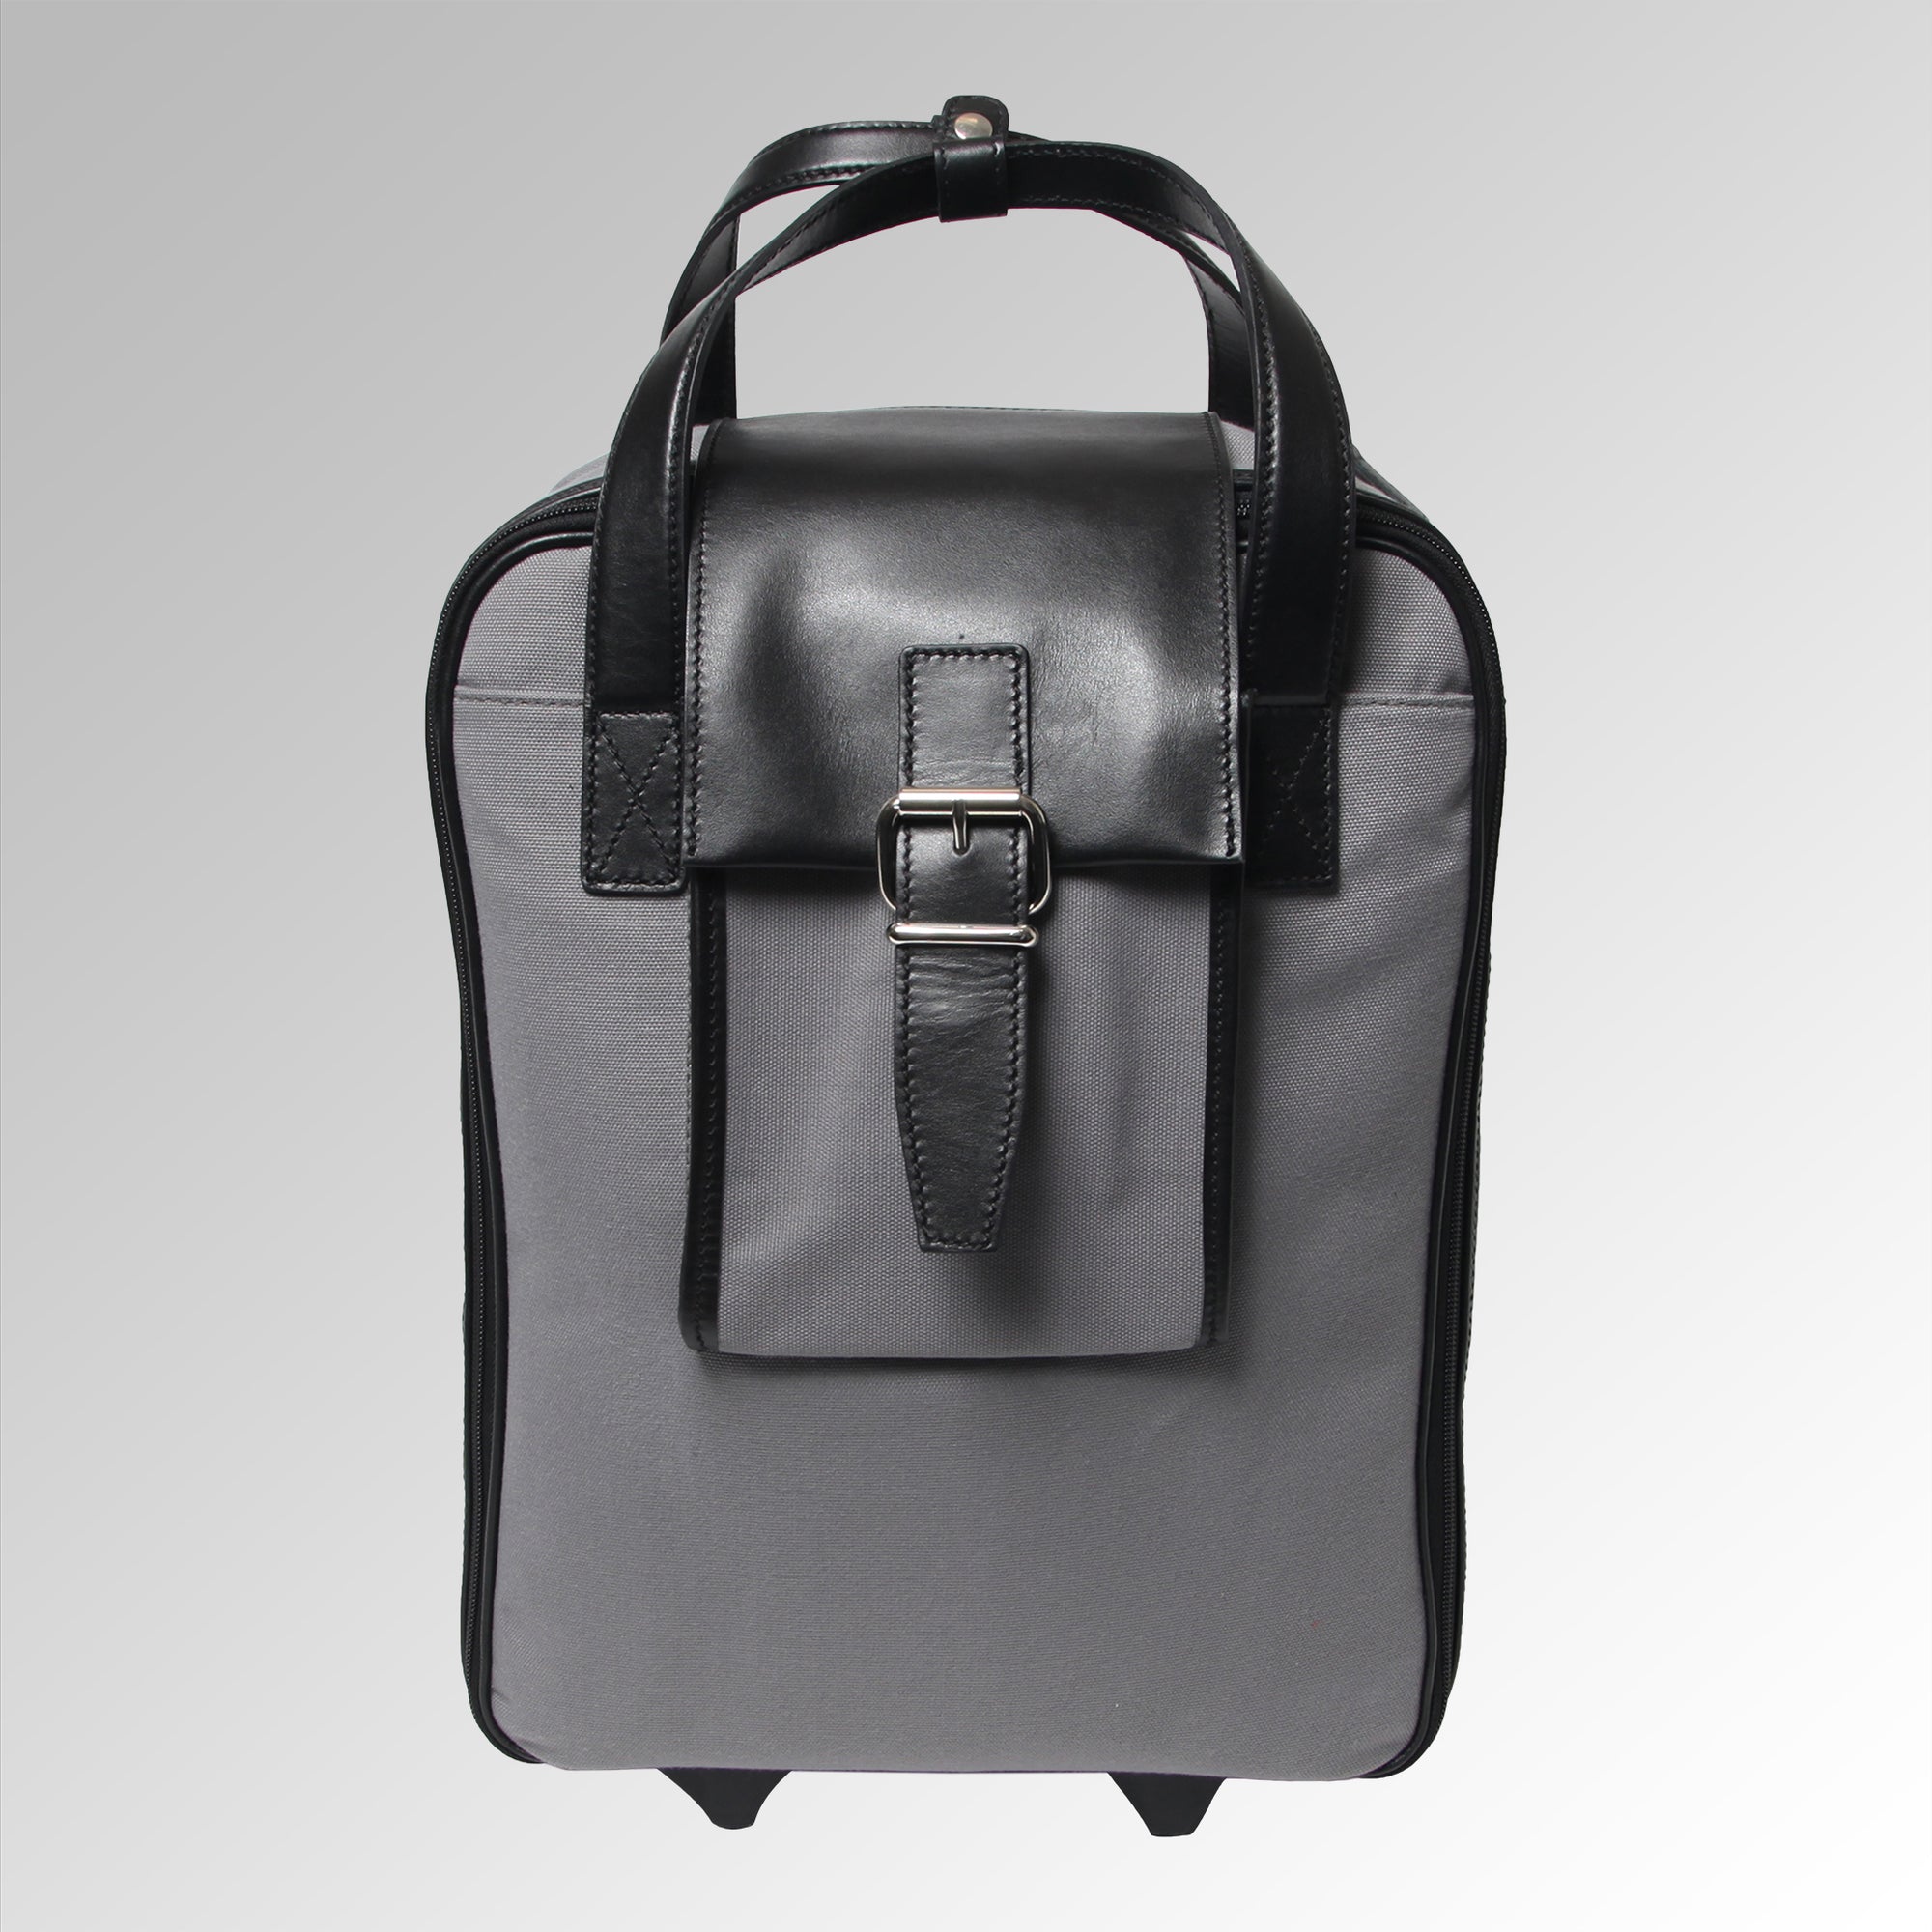 Travel - Gray/Black Carry On